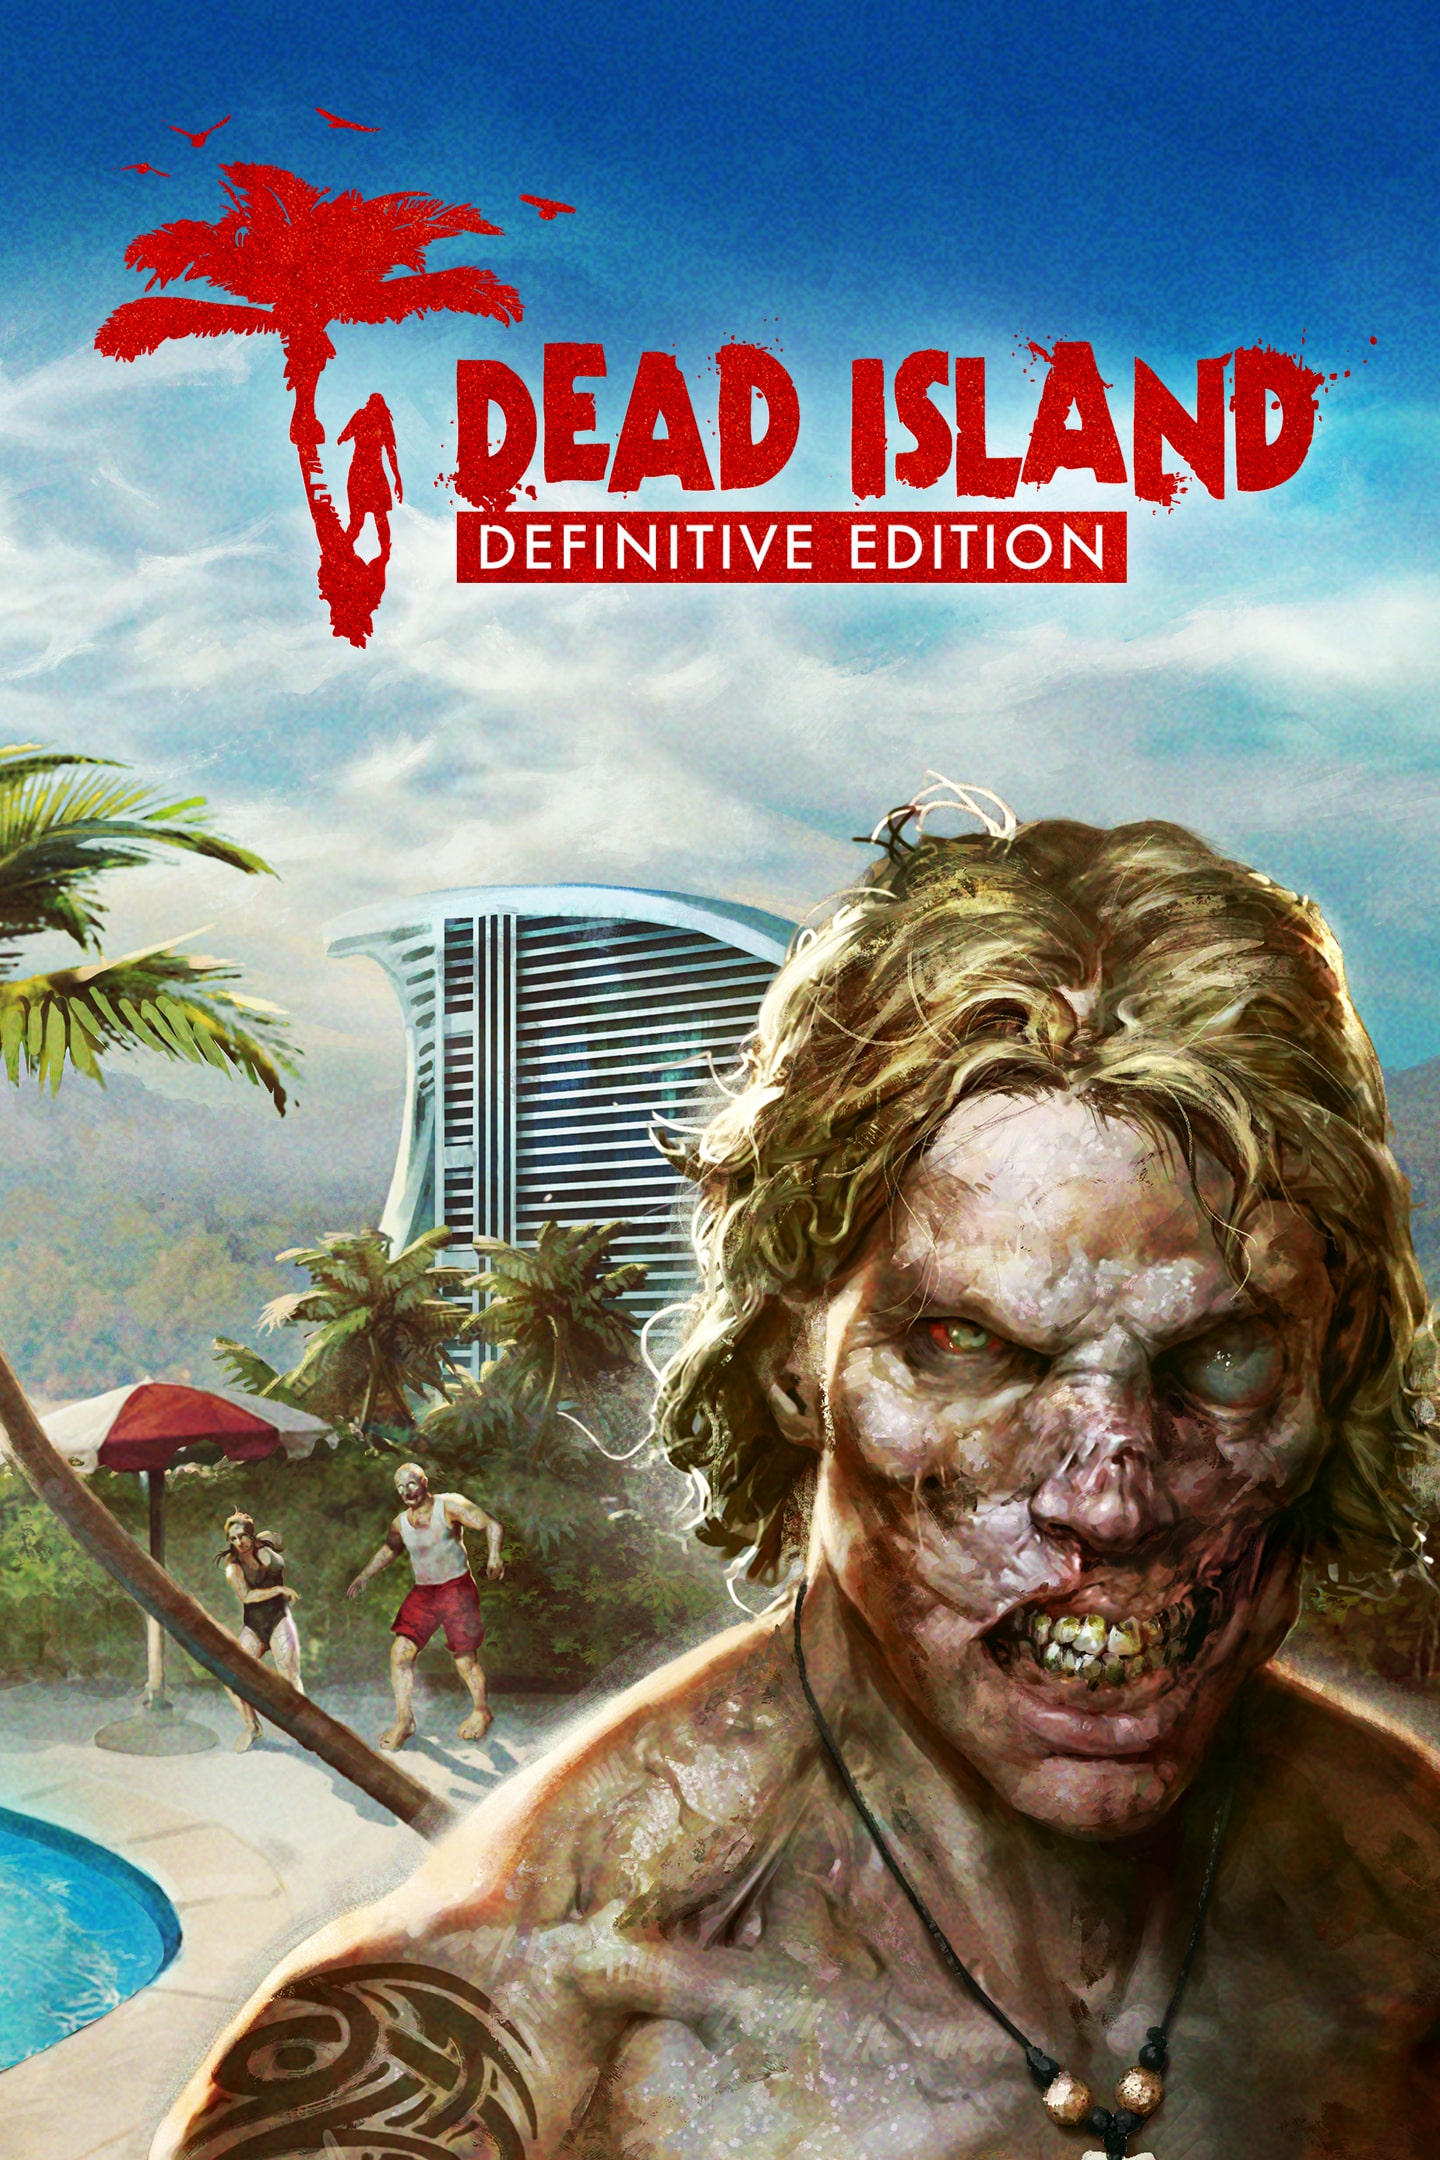 Dead Island: Riptide Definitive Edition Steam Key for PC - Buy now